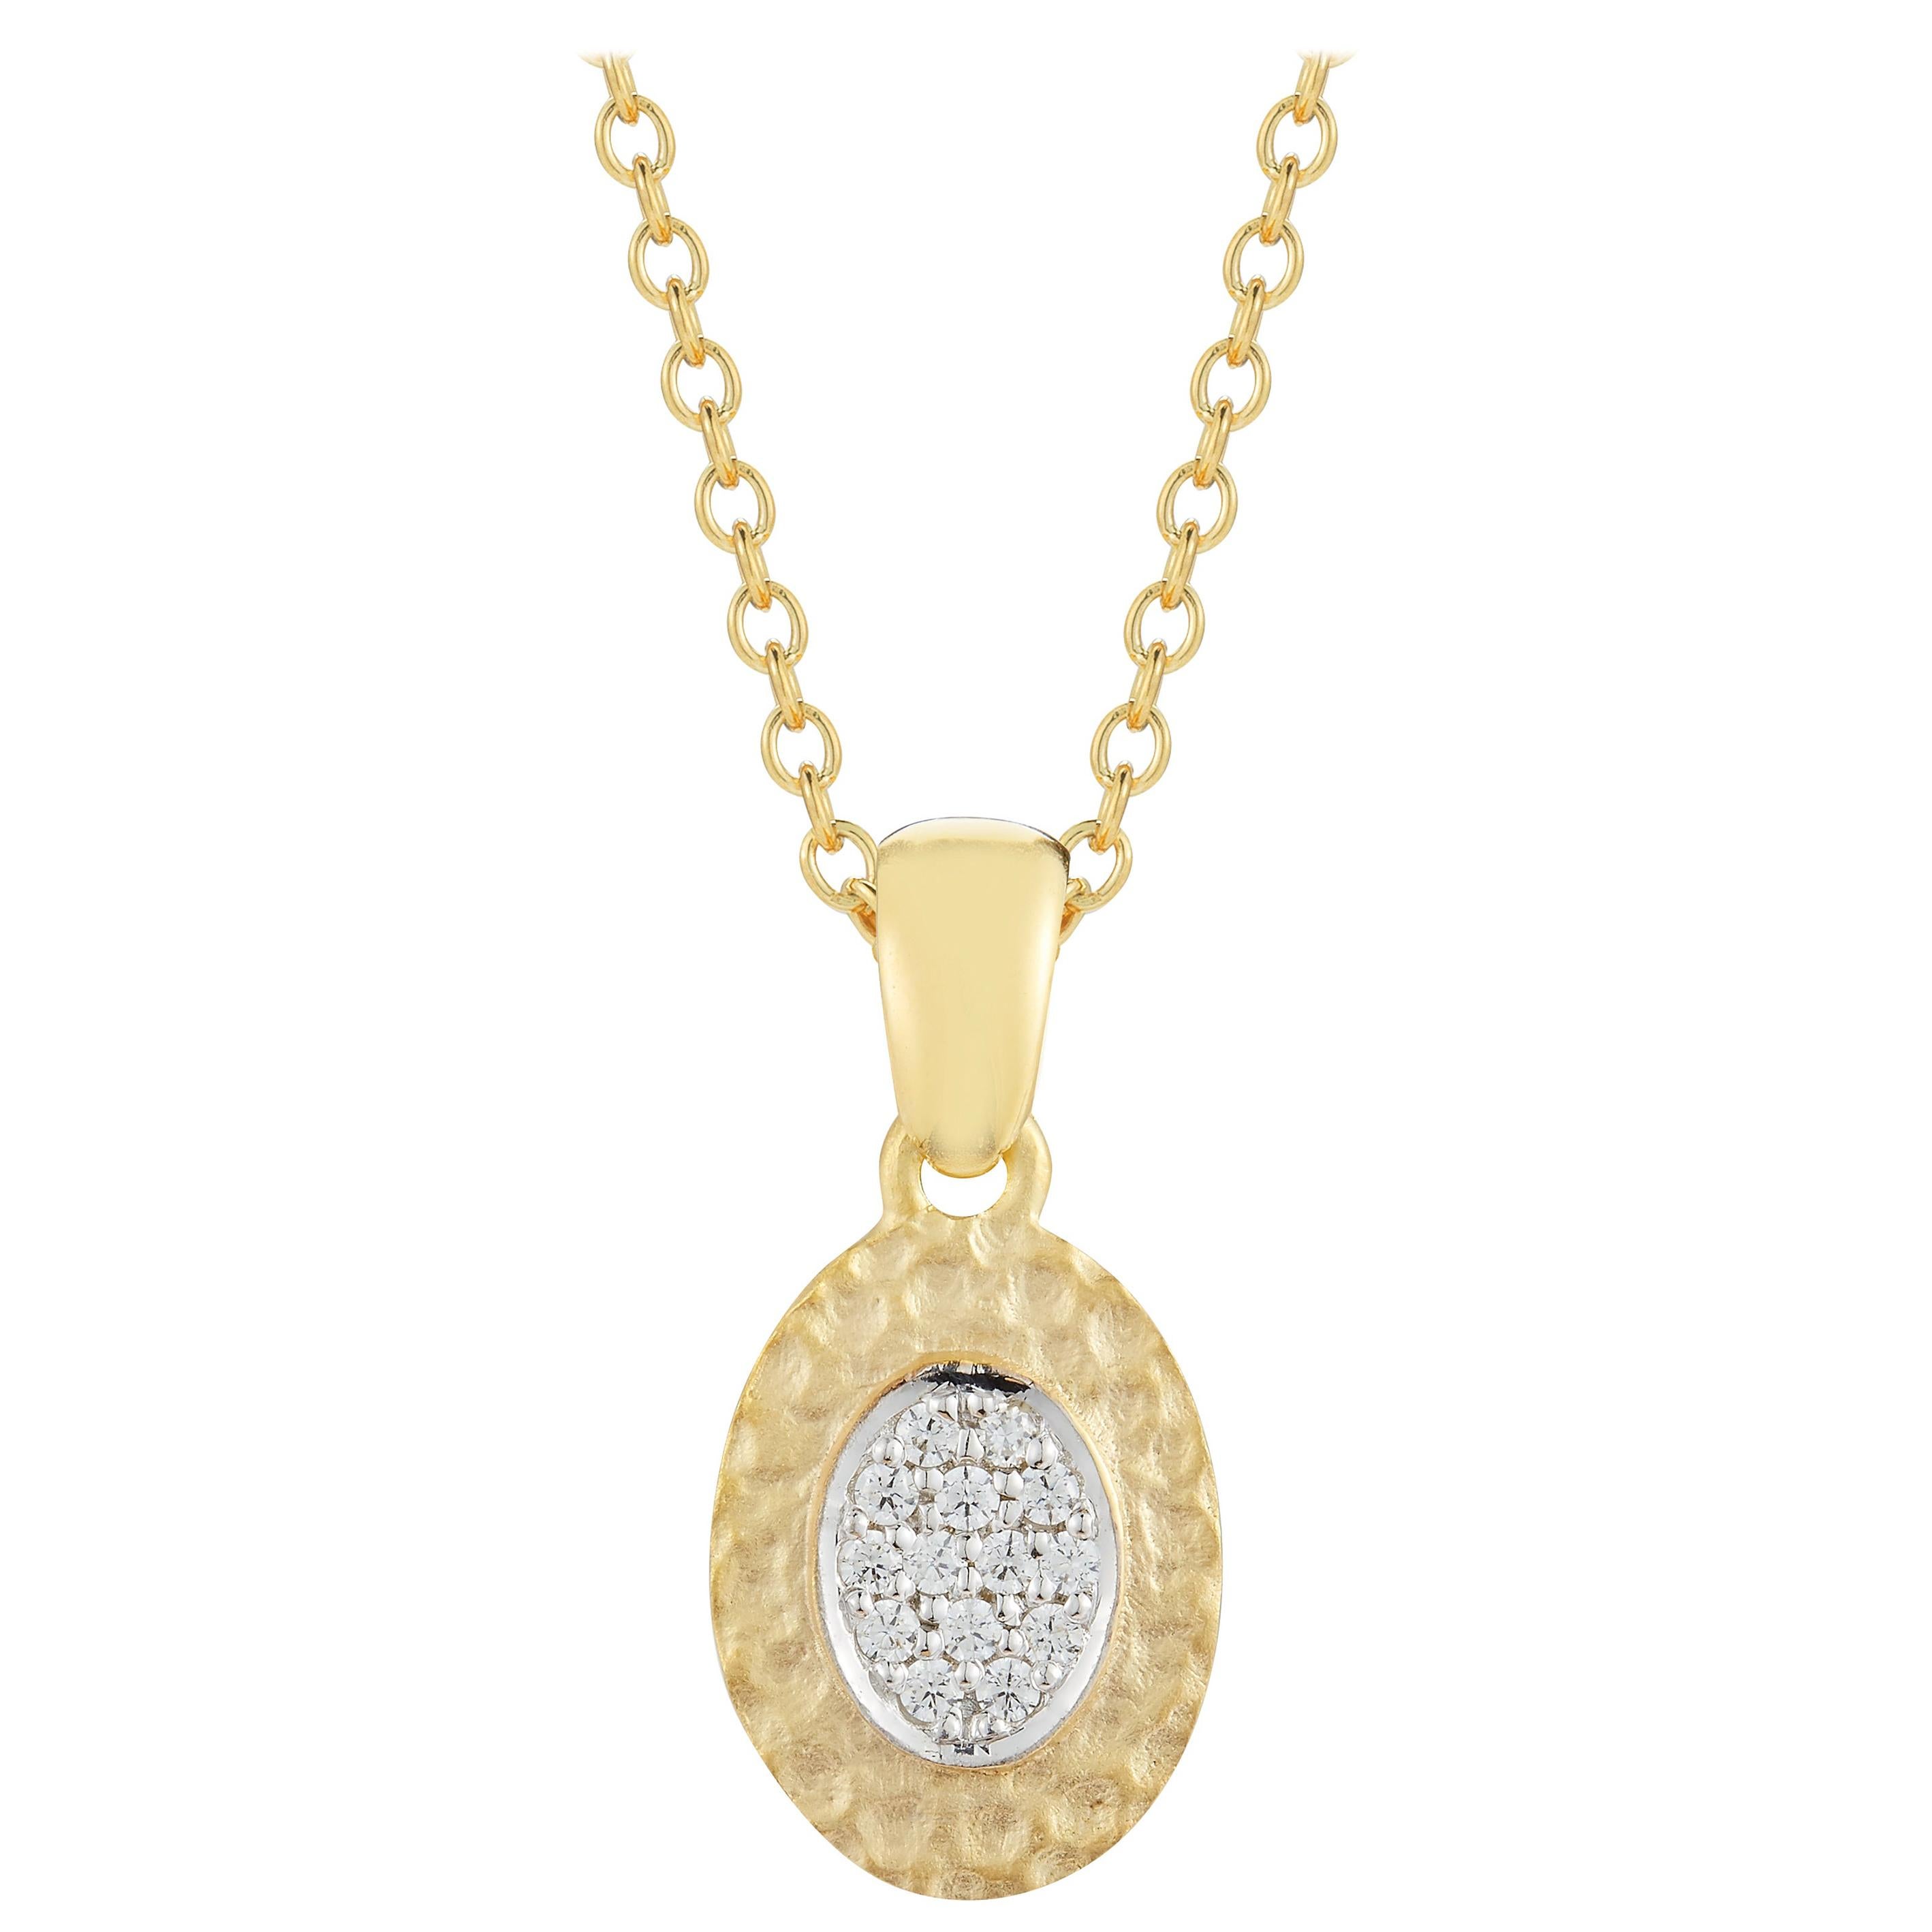 Handcrafted 14 Karat Yellow Gold Hammered Oval Pendant For Sale